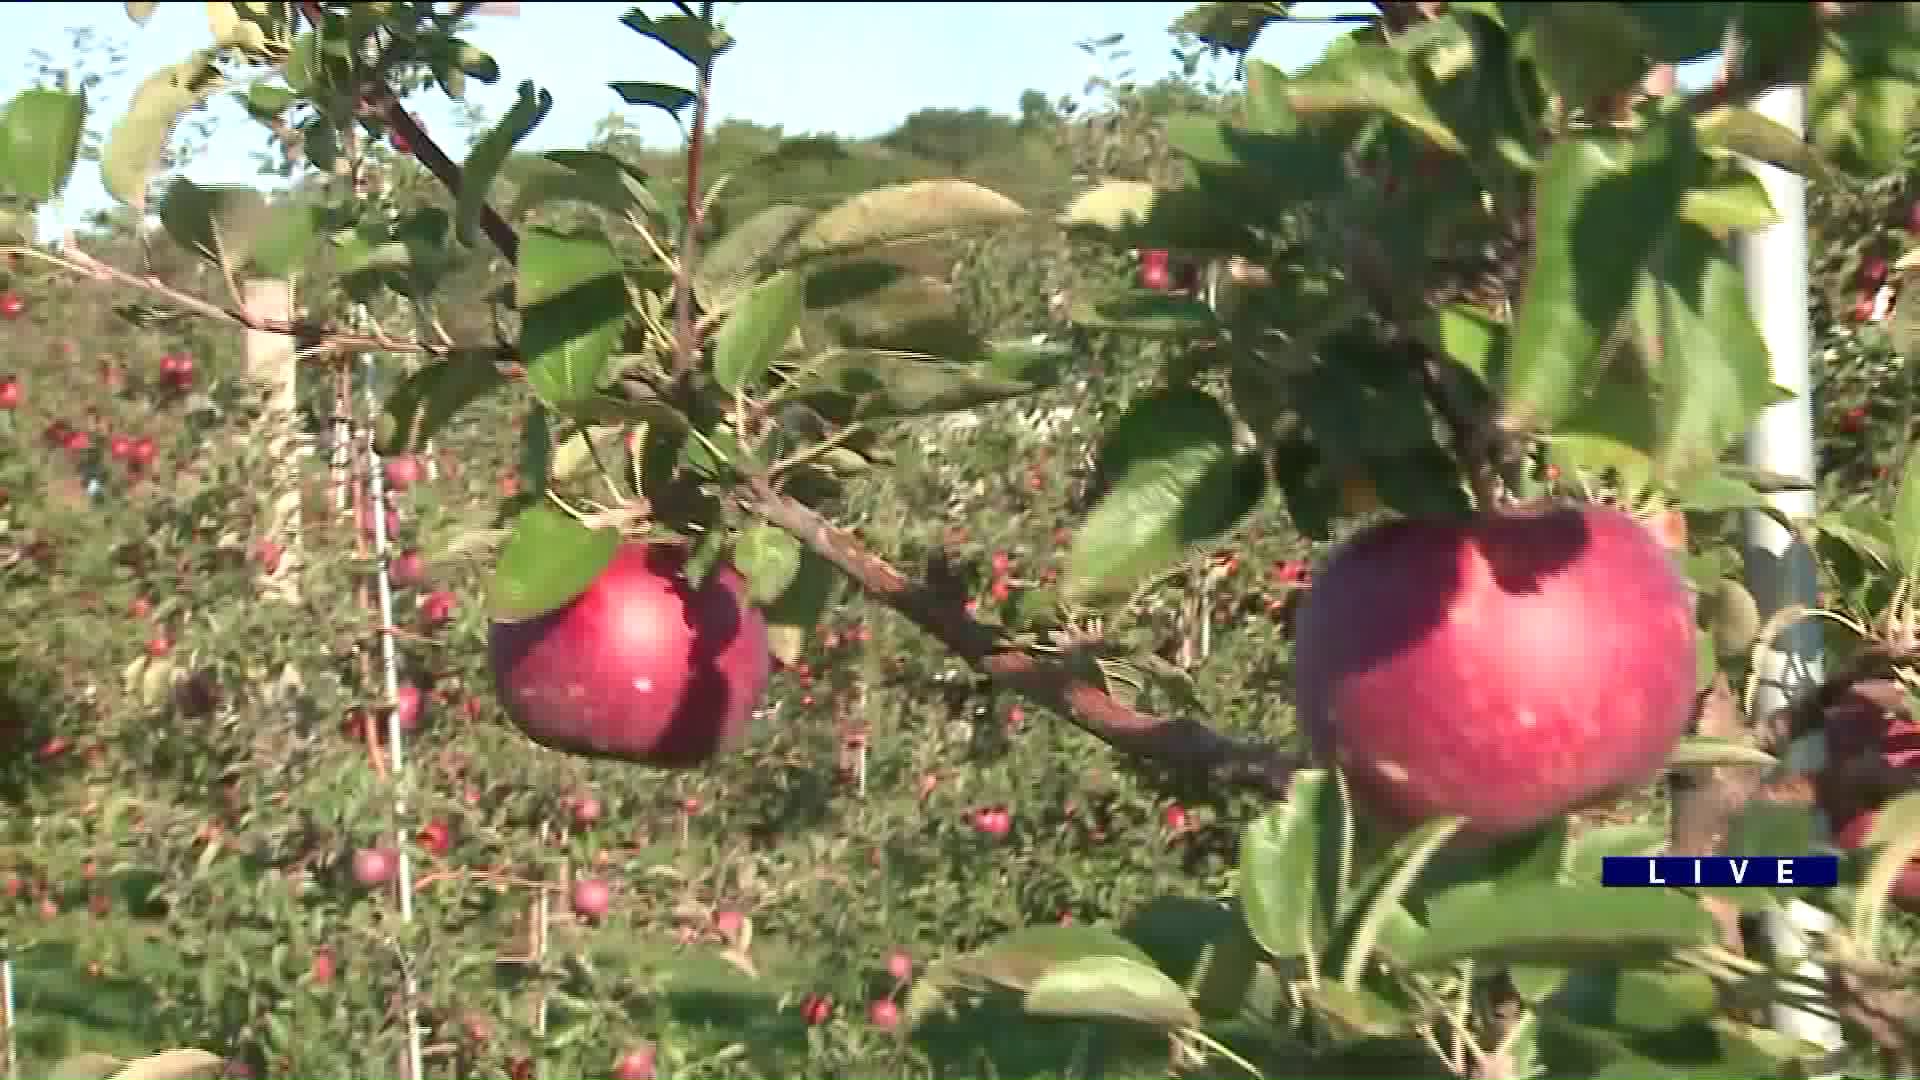 Around Town goes apple picking at Kuipers Family Farm